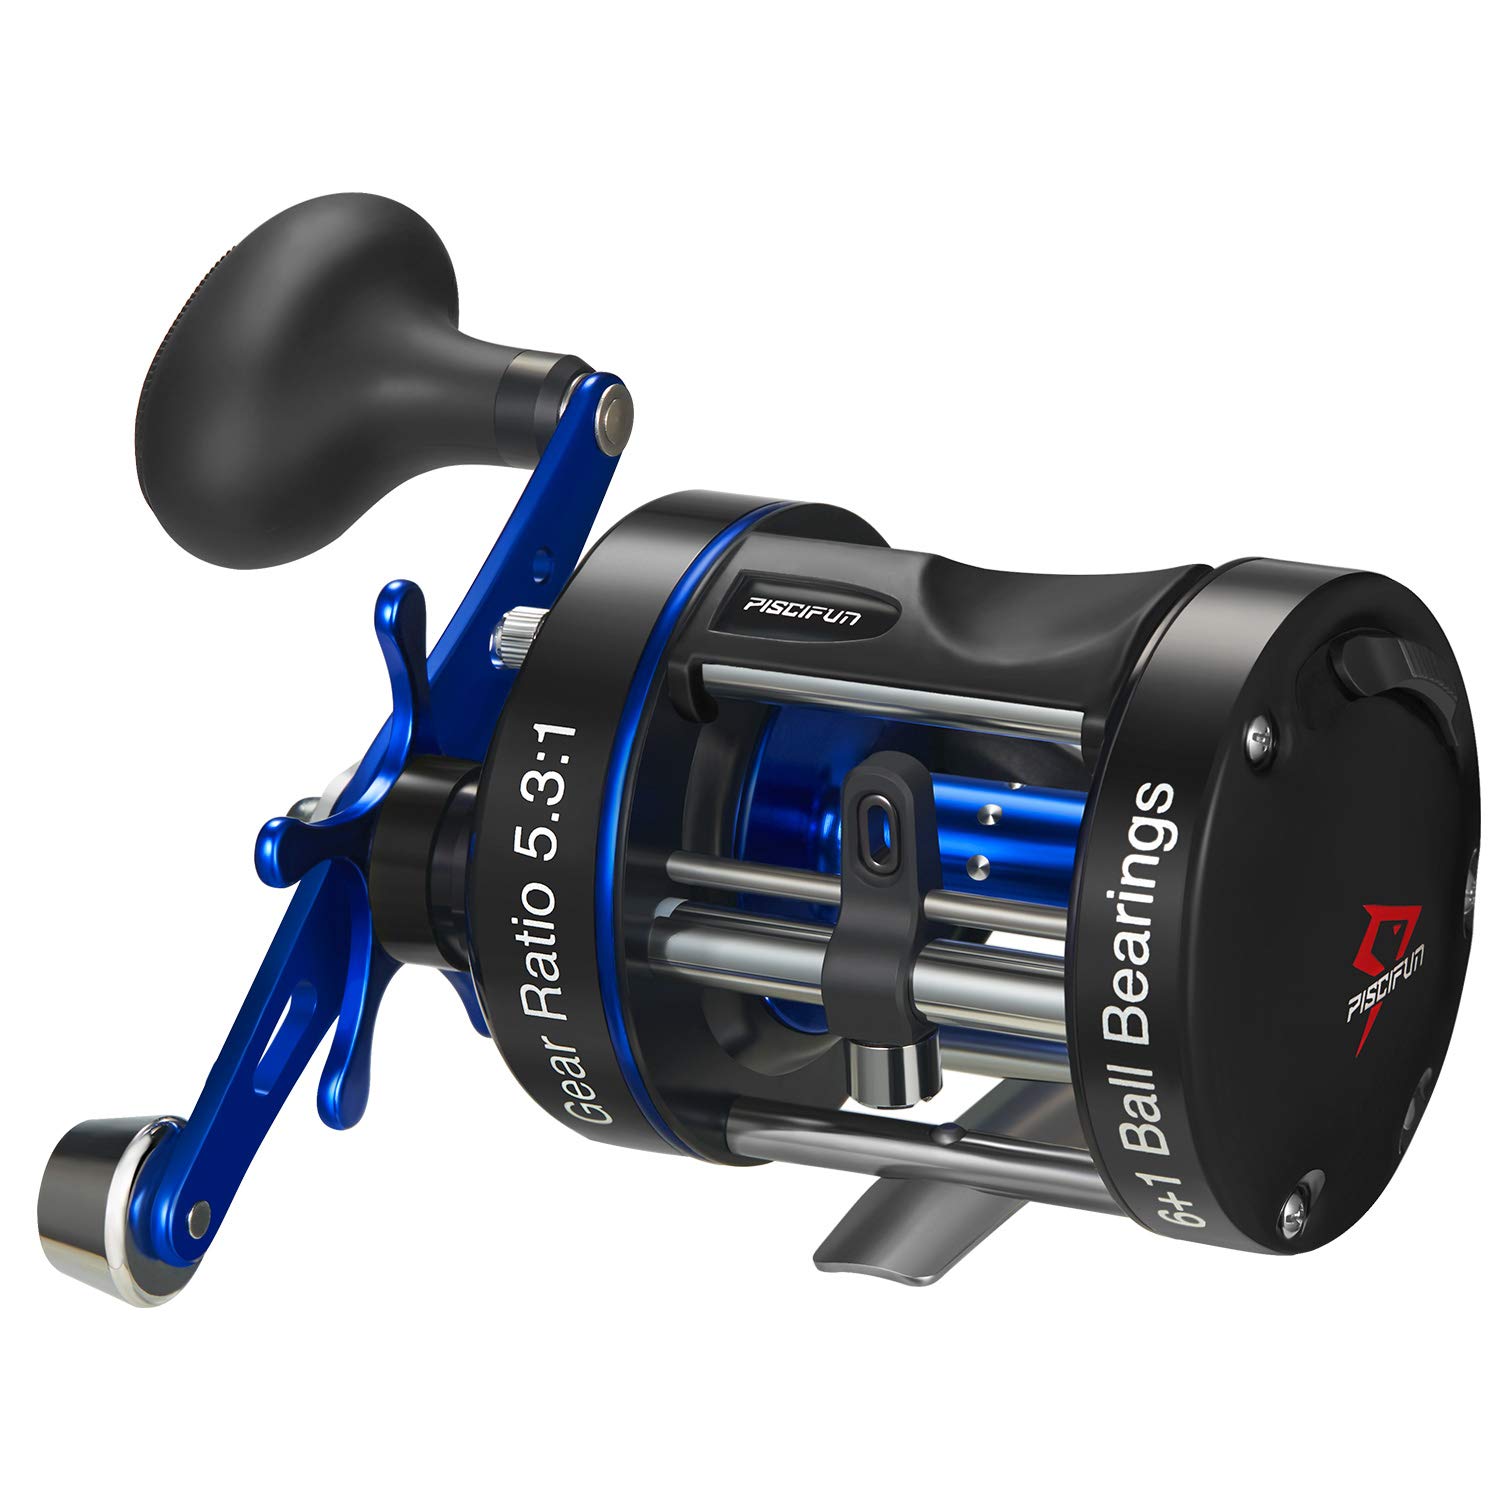 Piscifun Chaos XS Round Reel - Reinforced Metal Body Round Baitcasting Reel,  Smooth Powerful Saltwater Inshore Surf Trolling Fishing Reels, Conventional  Reels for Catfish, Musky, Bass, Pike 50 Right Handed